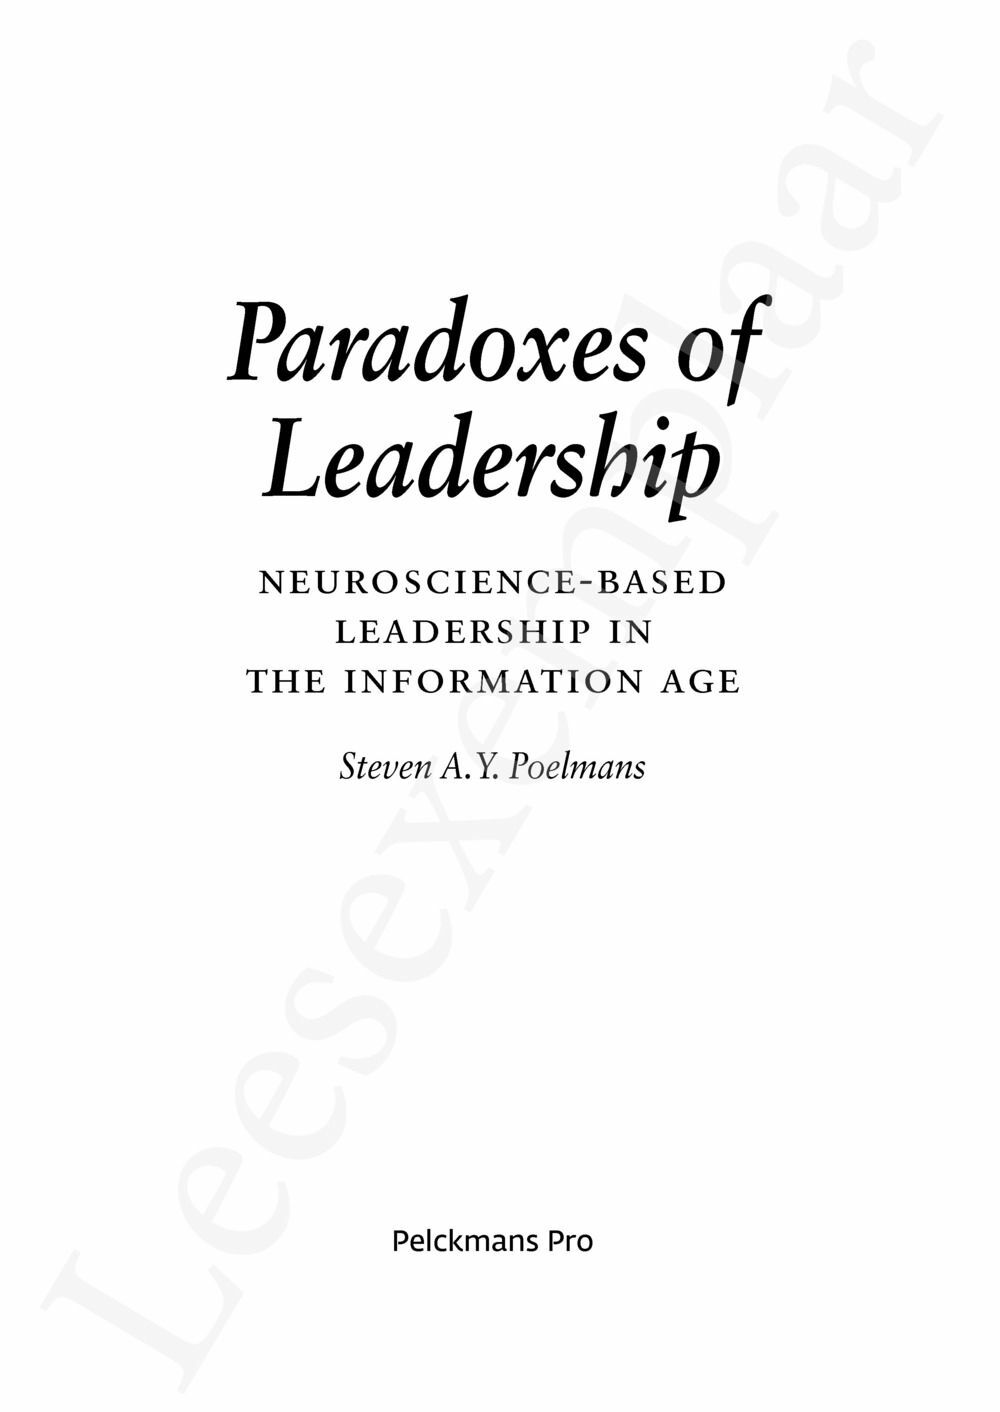 Preview: Paradoxes of Leadership